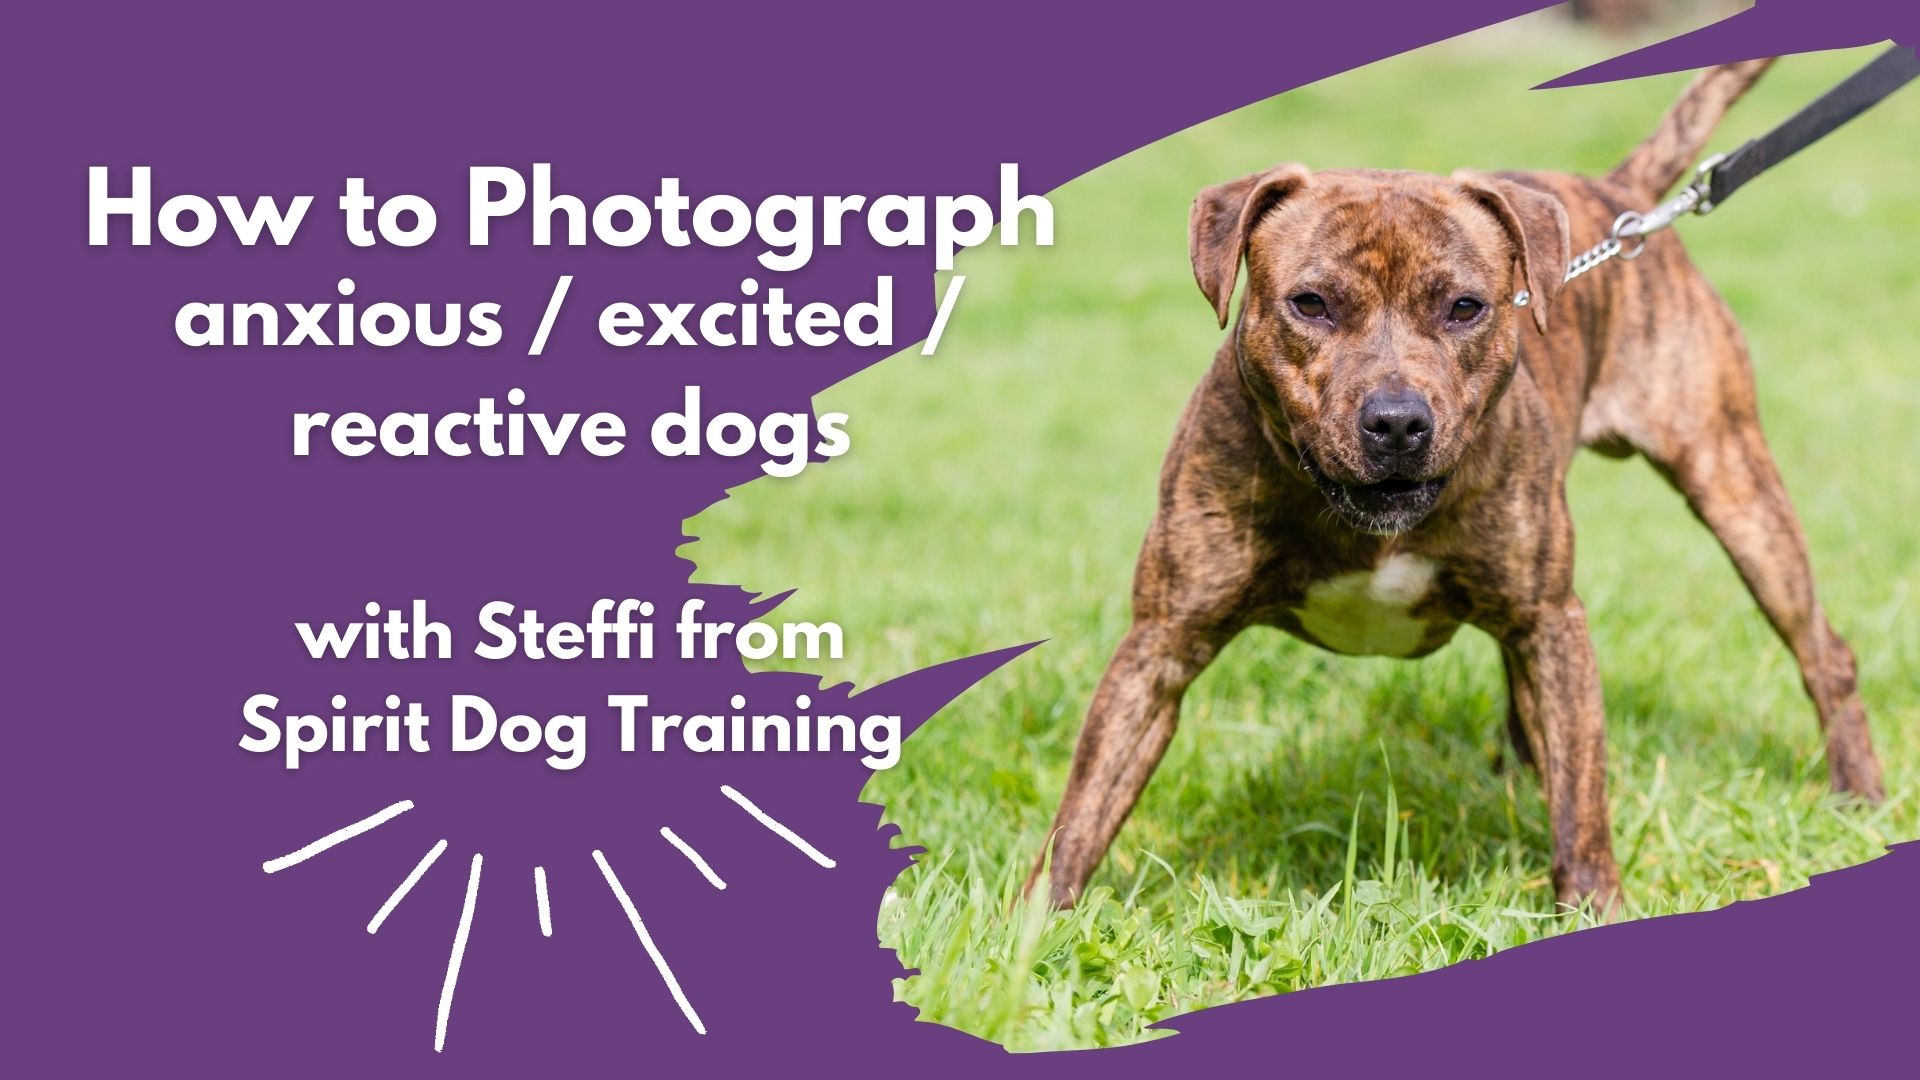 Guest Talk: Steffi from Spirit Dog Training: Photographing anxious / excited / reactive dogs